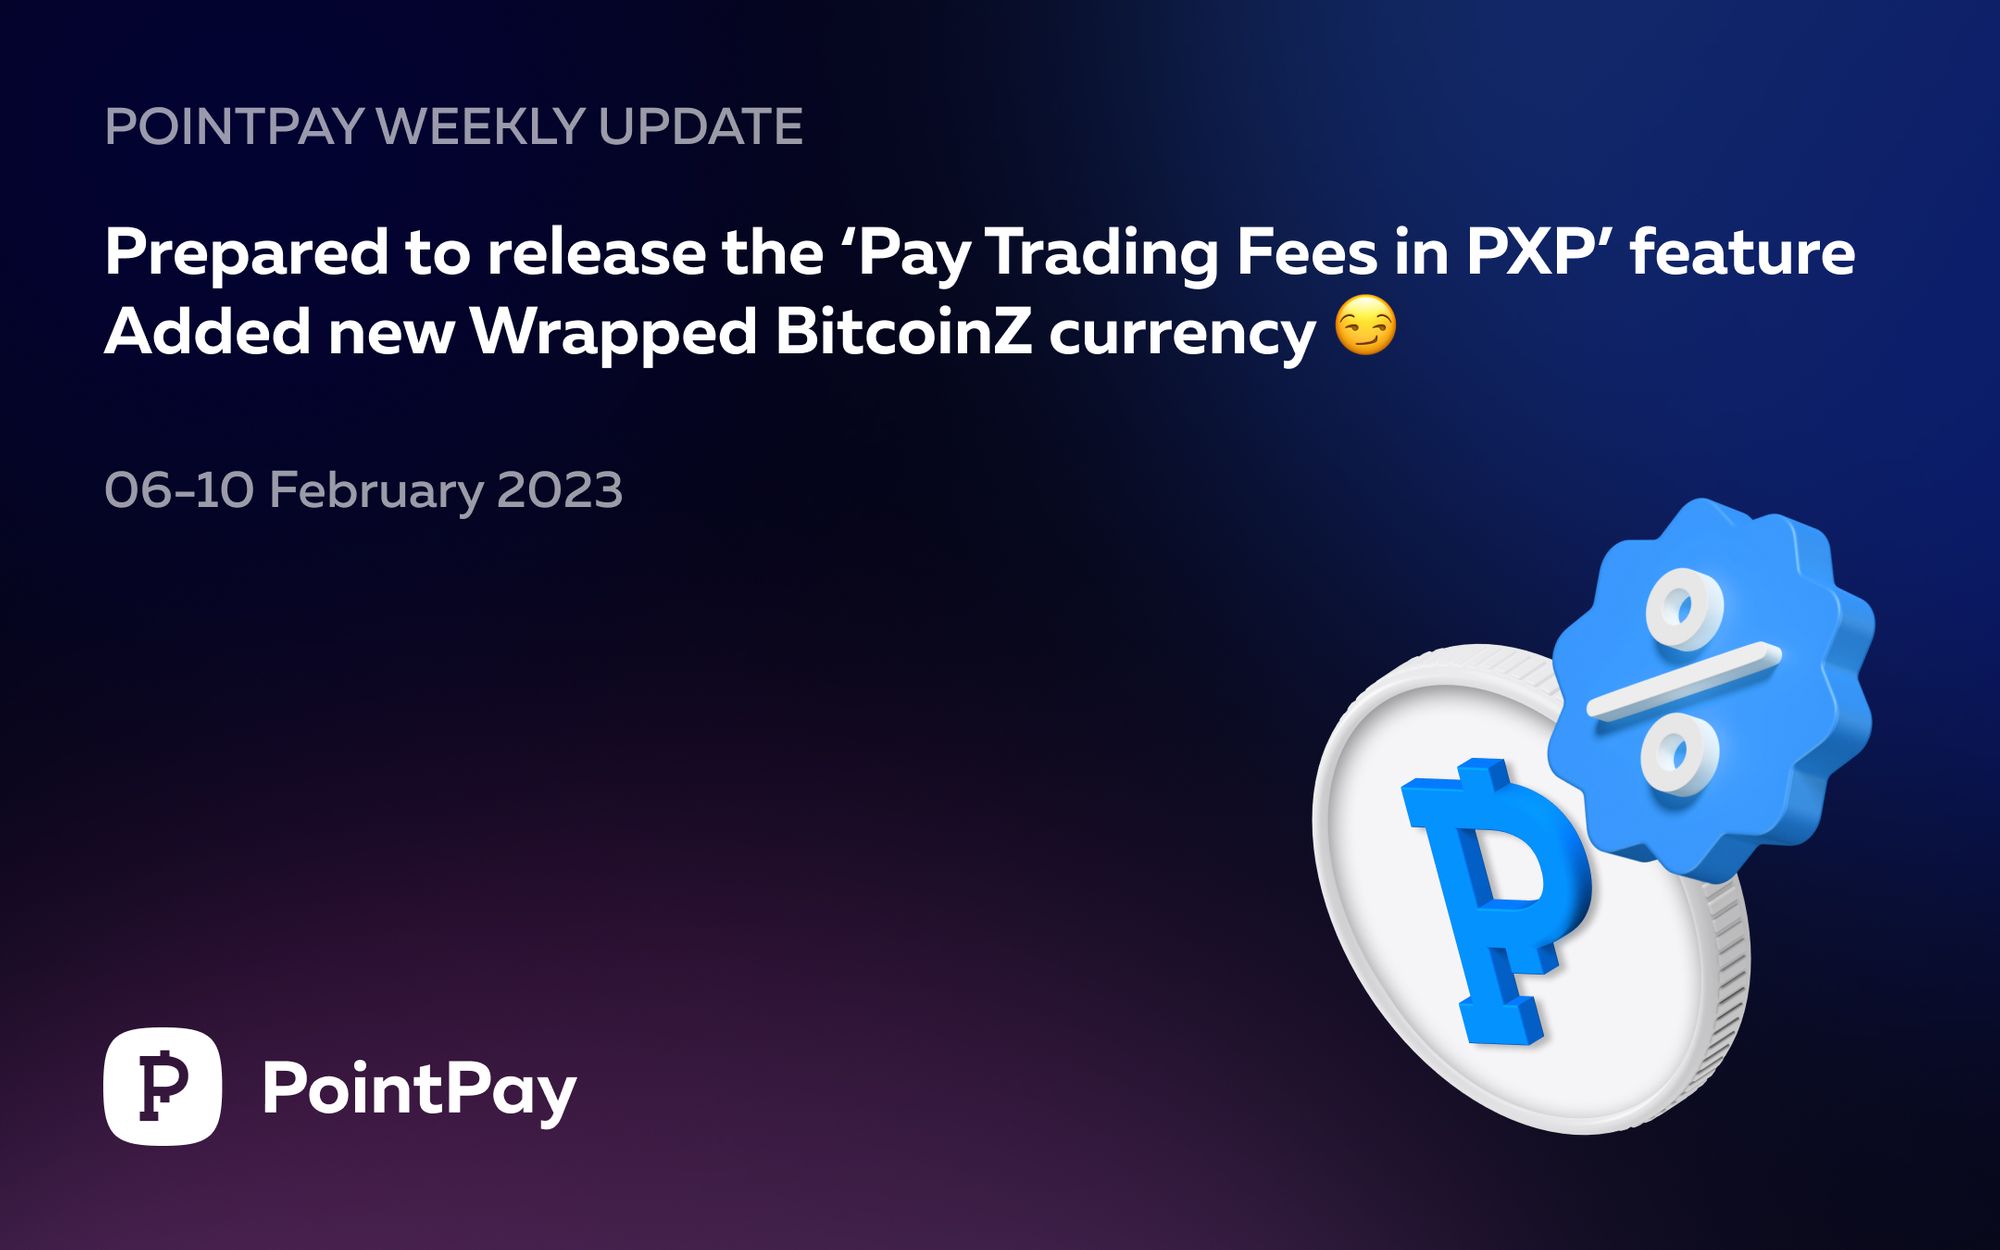 PointPay Weekly Update (6 - 10 February 2023)